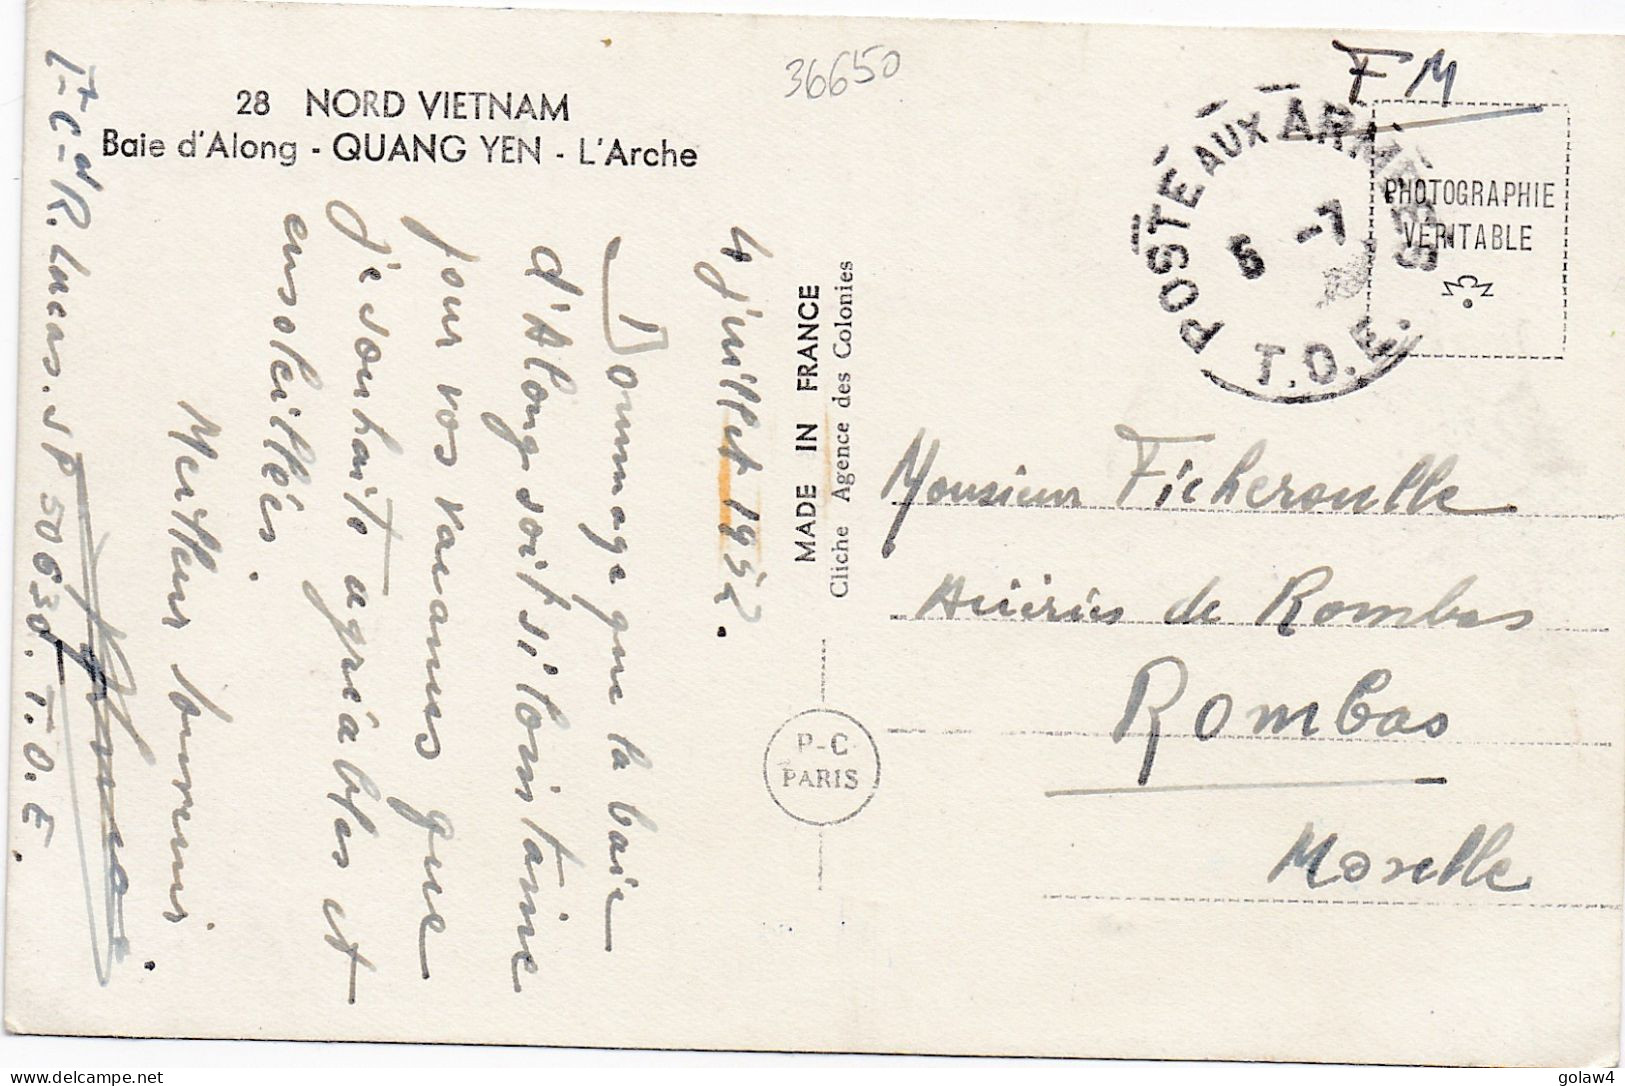 36650# CARTE POSTALE NORD VIETNAM BAIE ALONG QUANG YEN ARCHE POSTE AUX ARMEES TOE 1952 T.O.E. INDOCHINE ROMBAS MOSELLE - War Of Indo-China / Vietnam